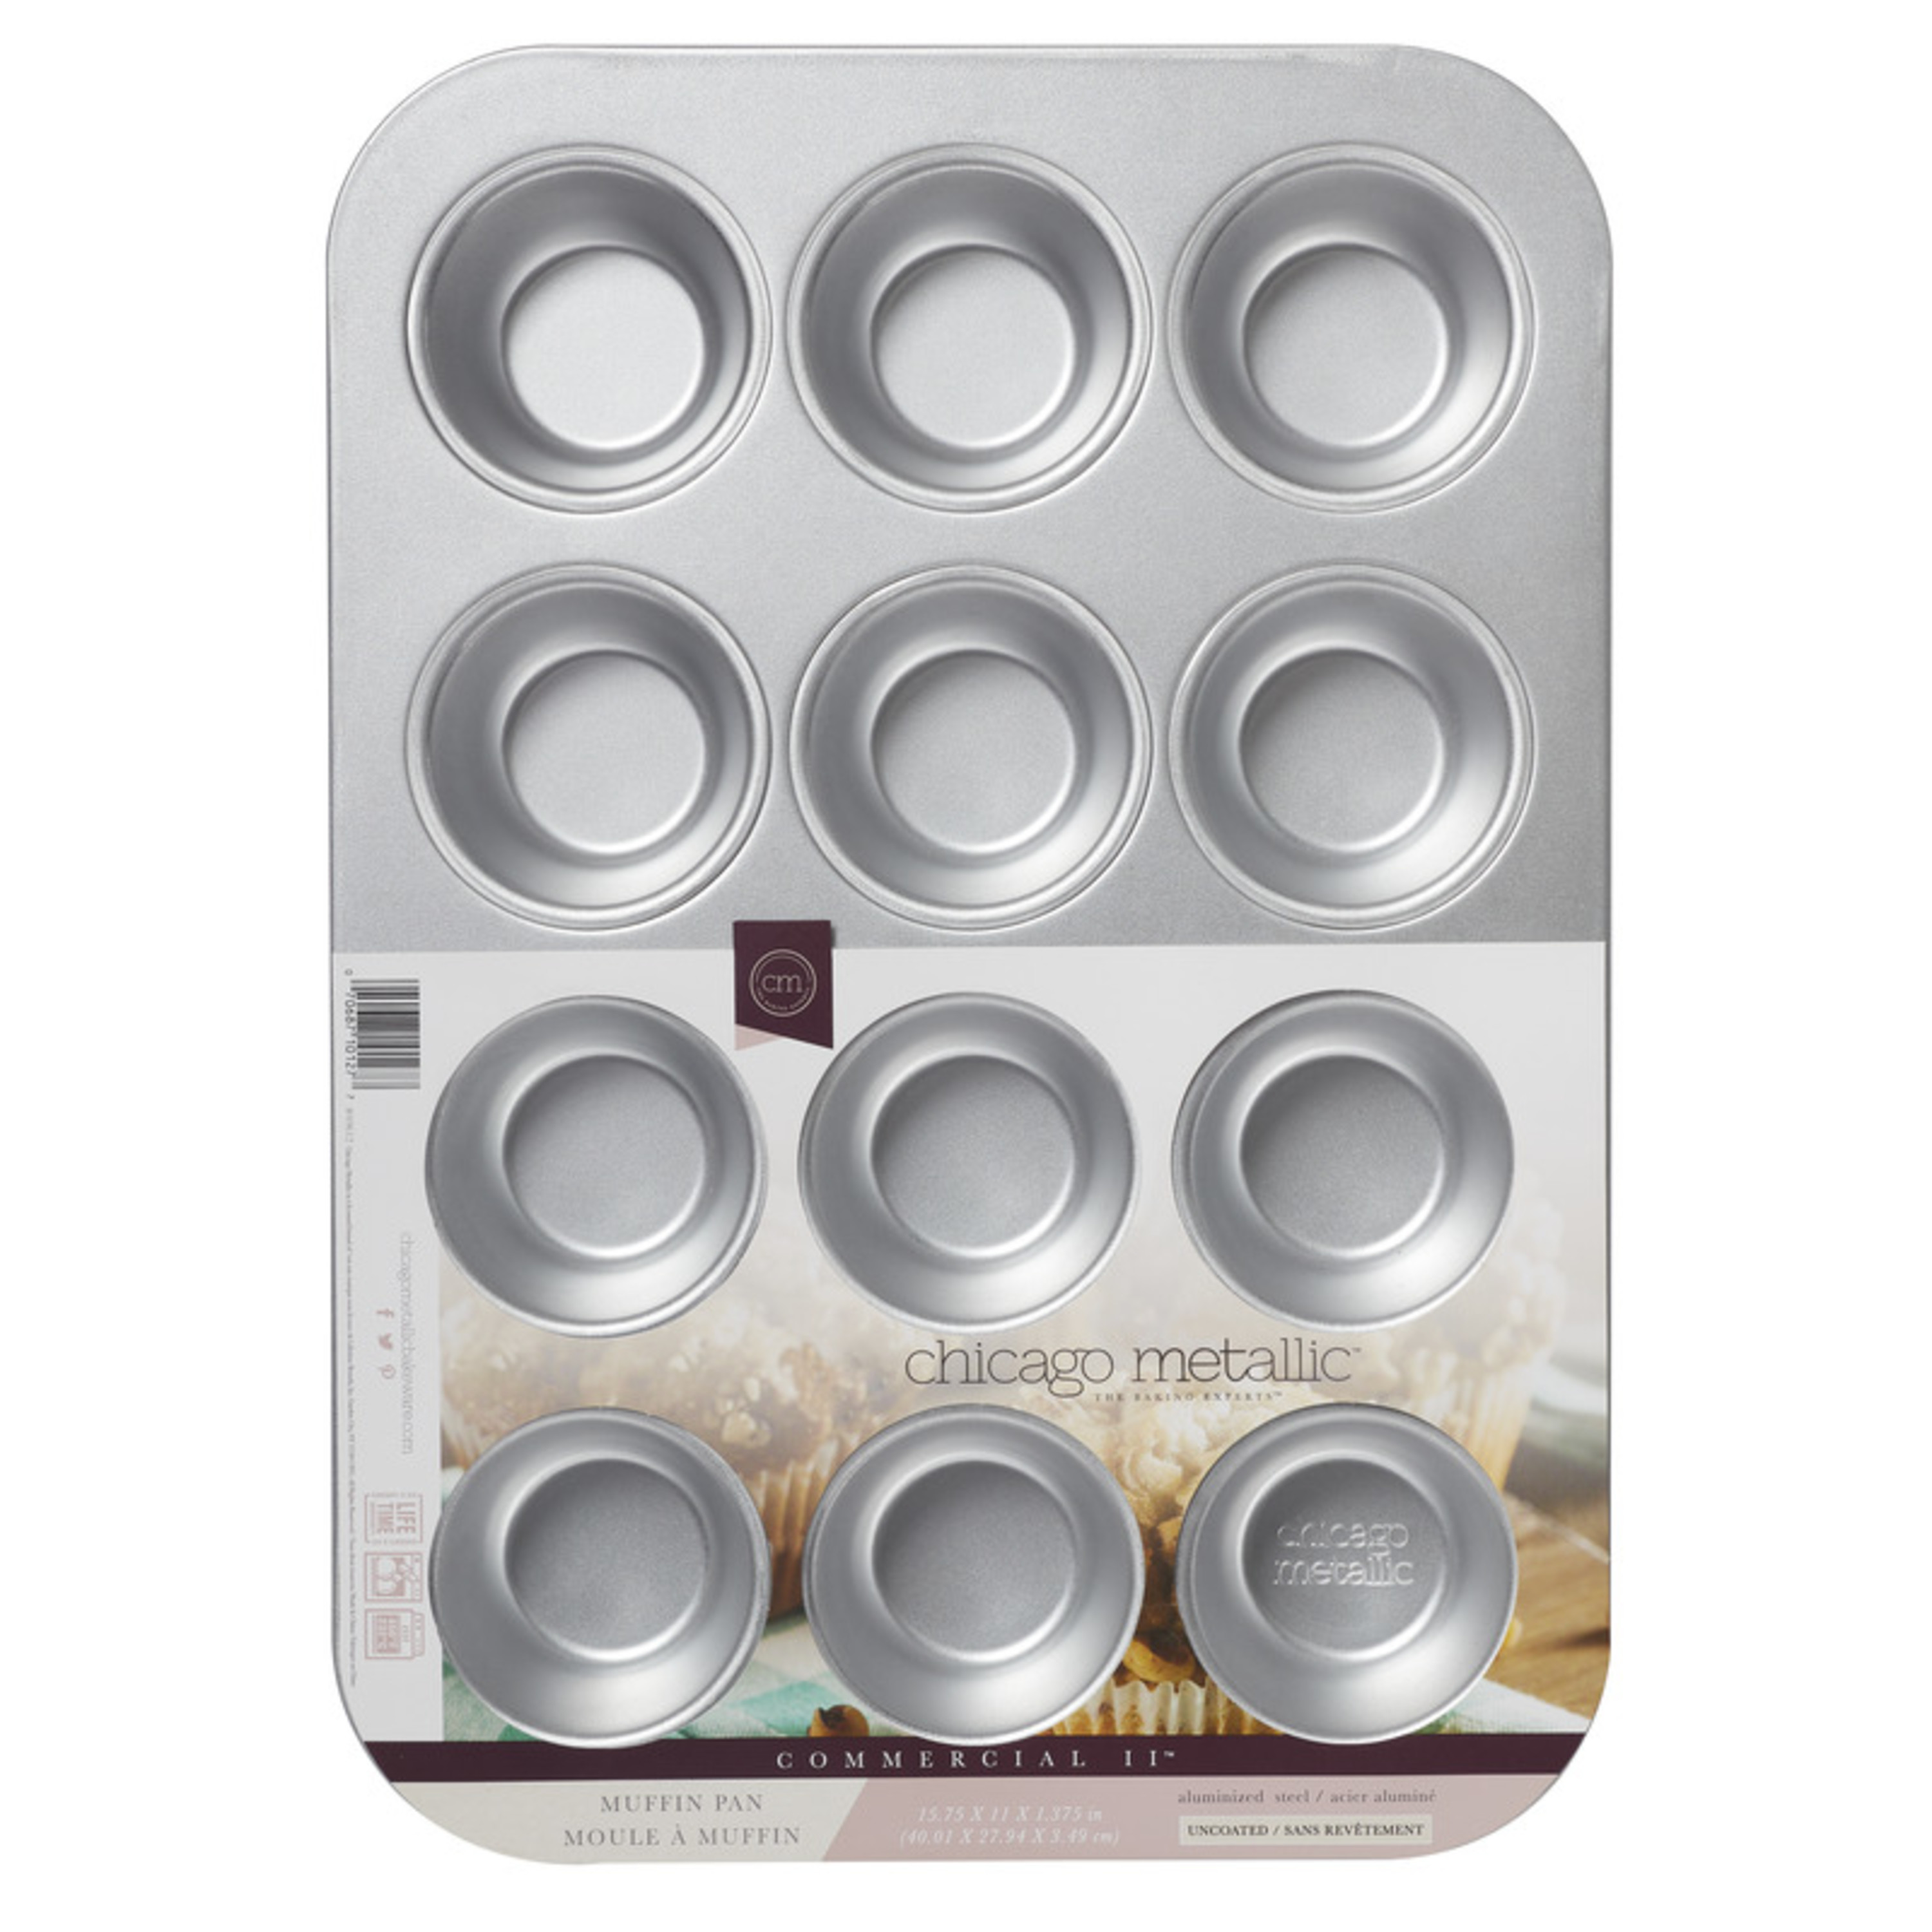 Chicago Metallic Commercial II Uncoated 12-Cup Muffin Pan